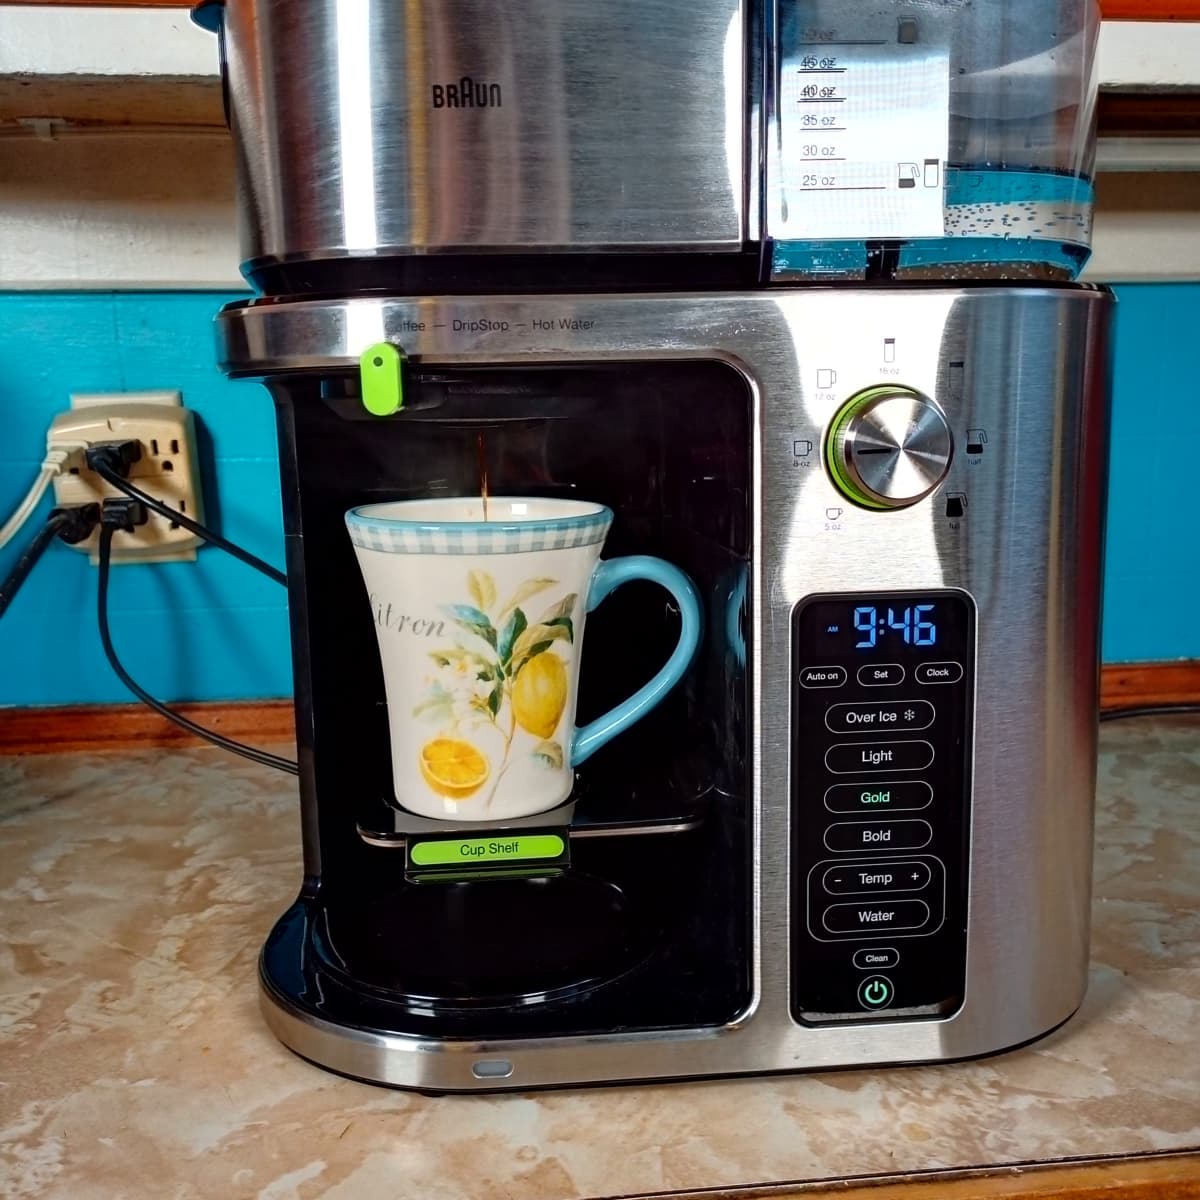 Review of the Braun MultiServe Coffee Machine - Delishably